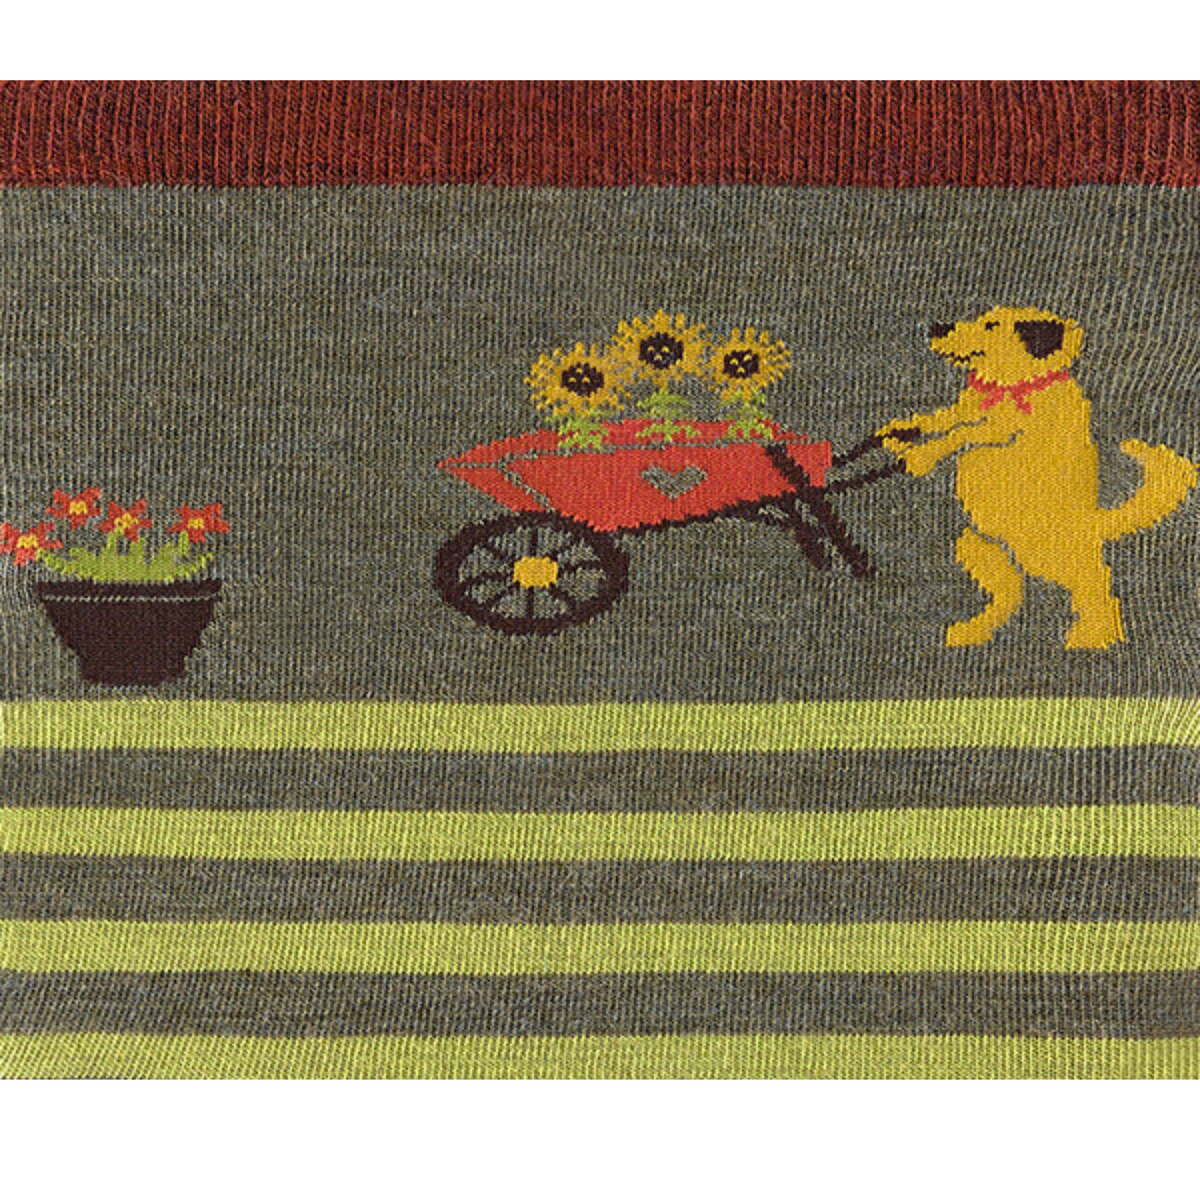 Darn Tough 6037 Animal Haus Lightweight Cushion Crew women&#39;s sock featuring olive green sock with green stripes and yellow dog with wheelbarrow of sunflowers at top. Detail of yellow dog.